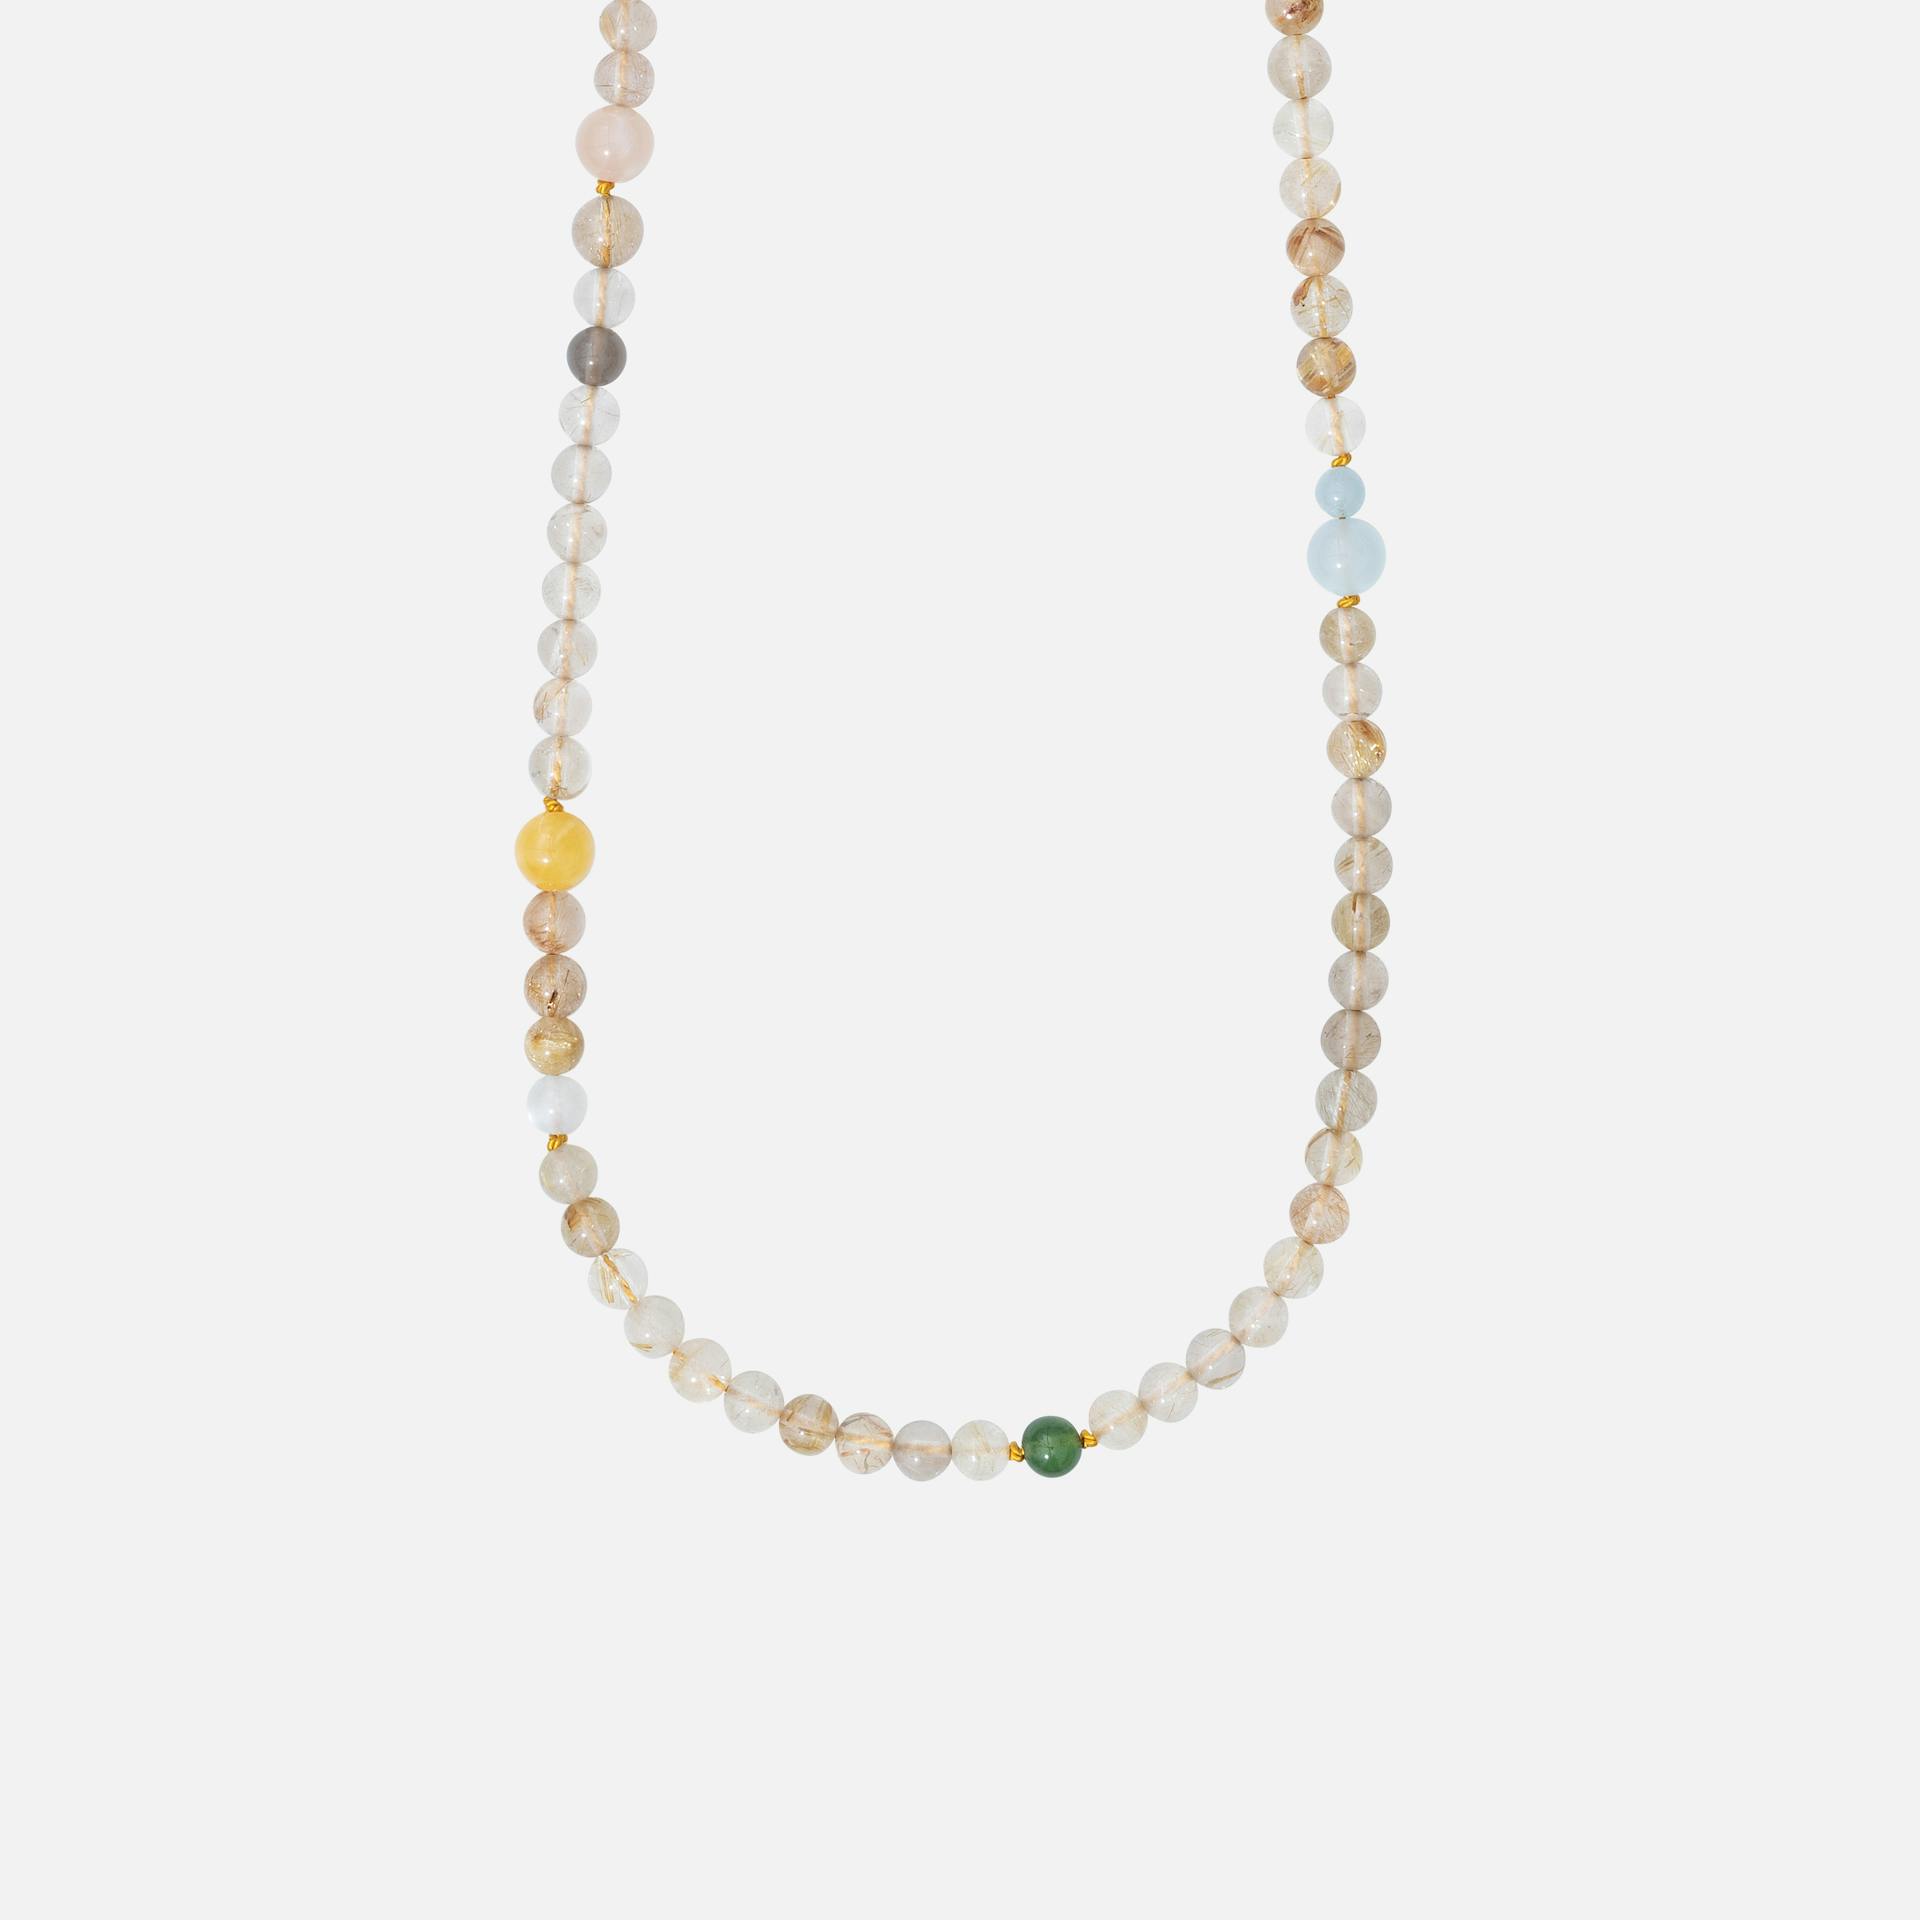 Bead collier without lock Mixed stones and pearls